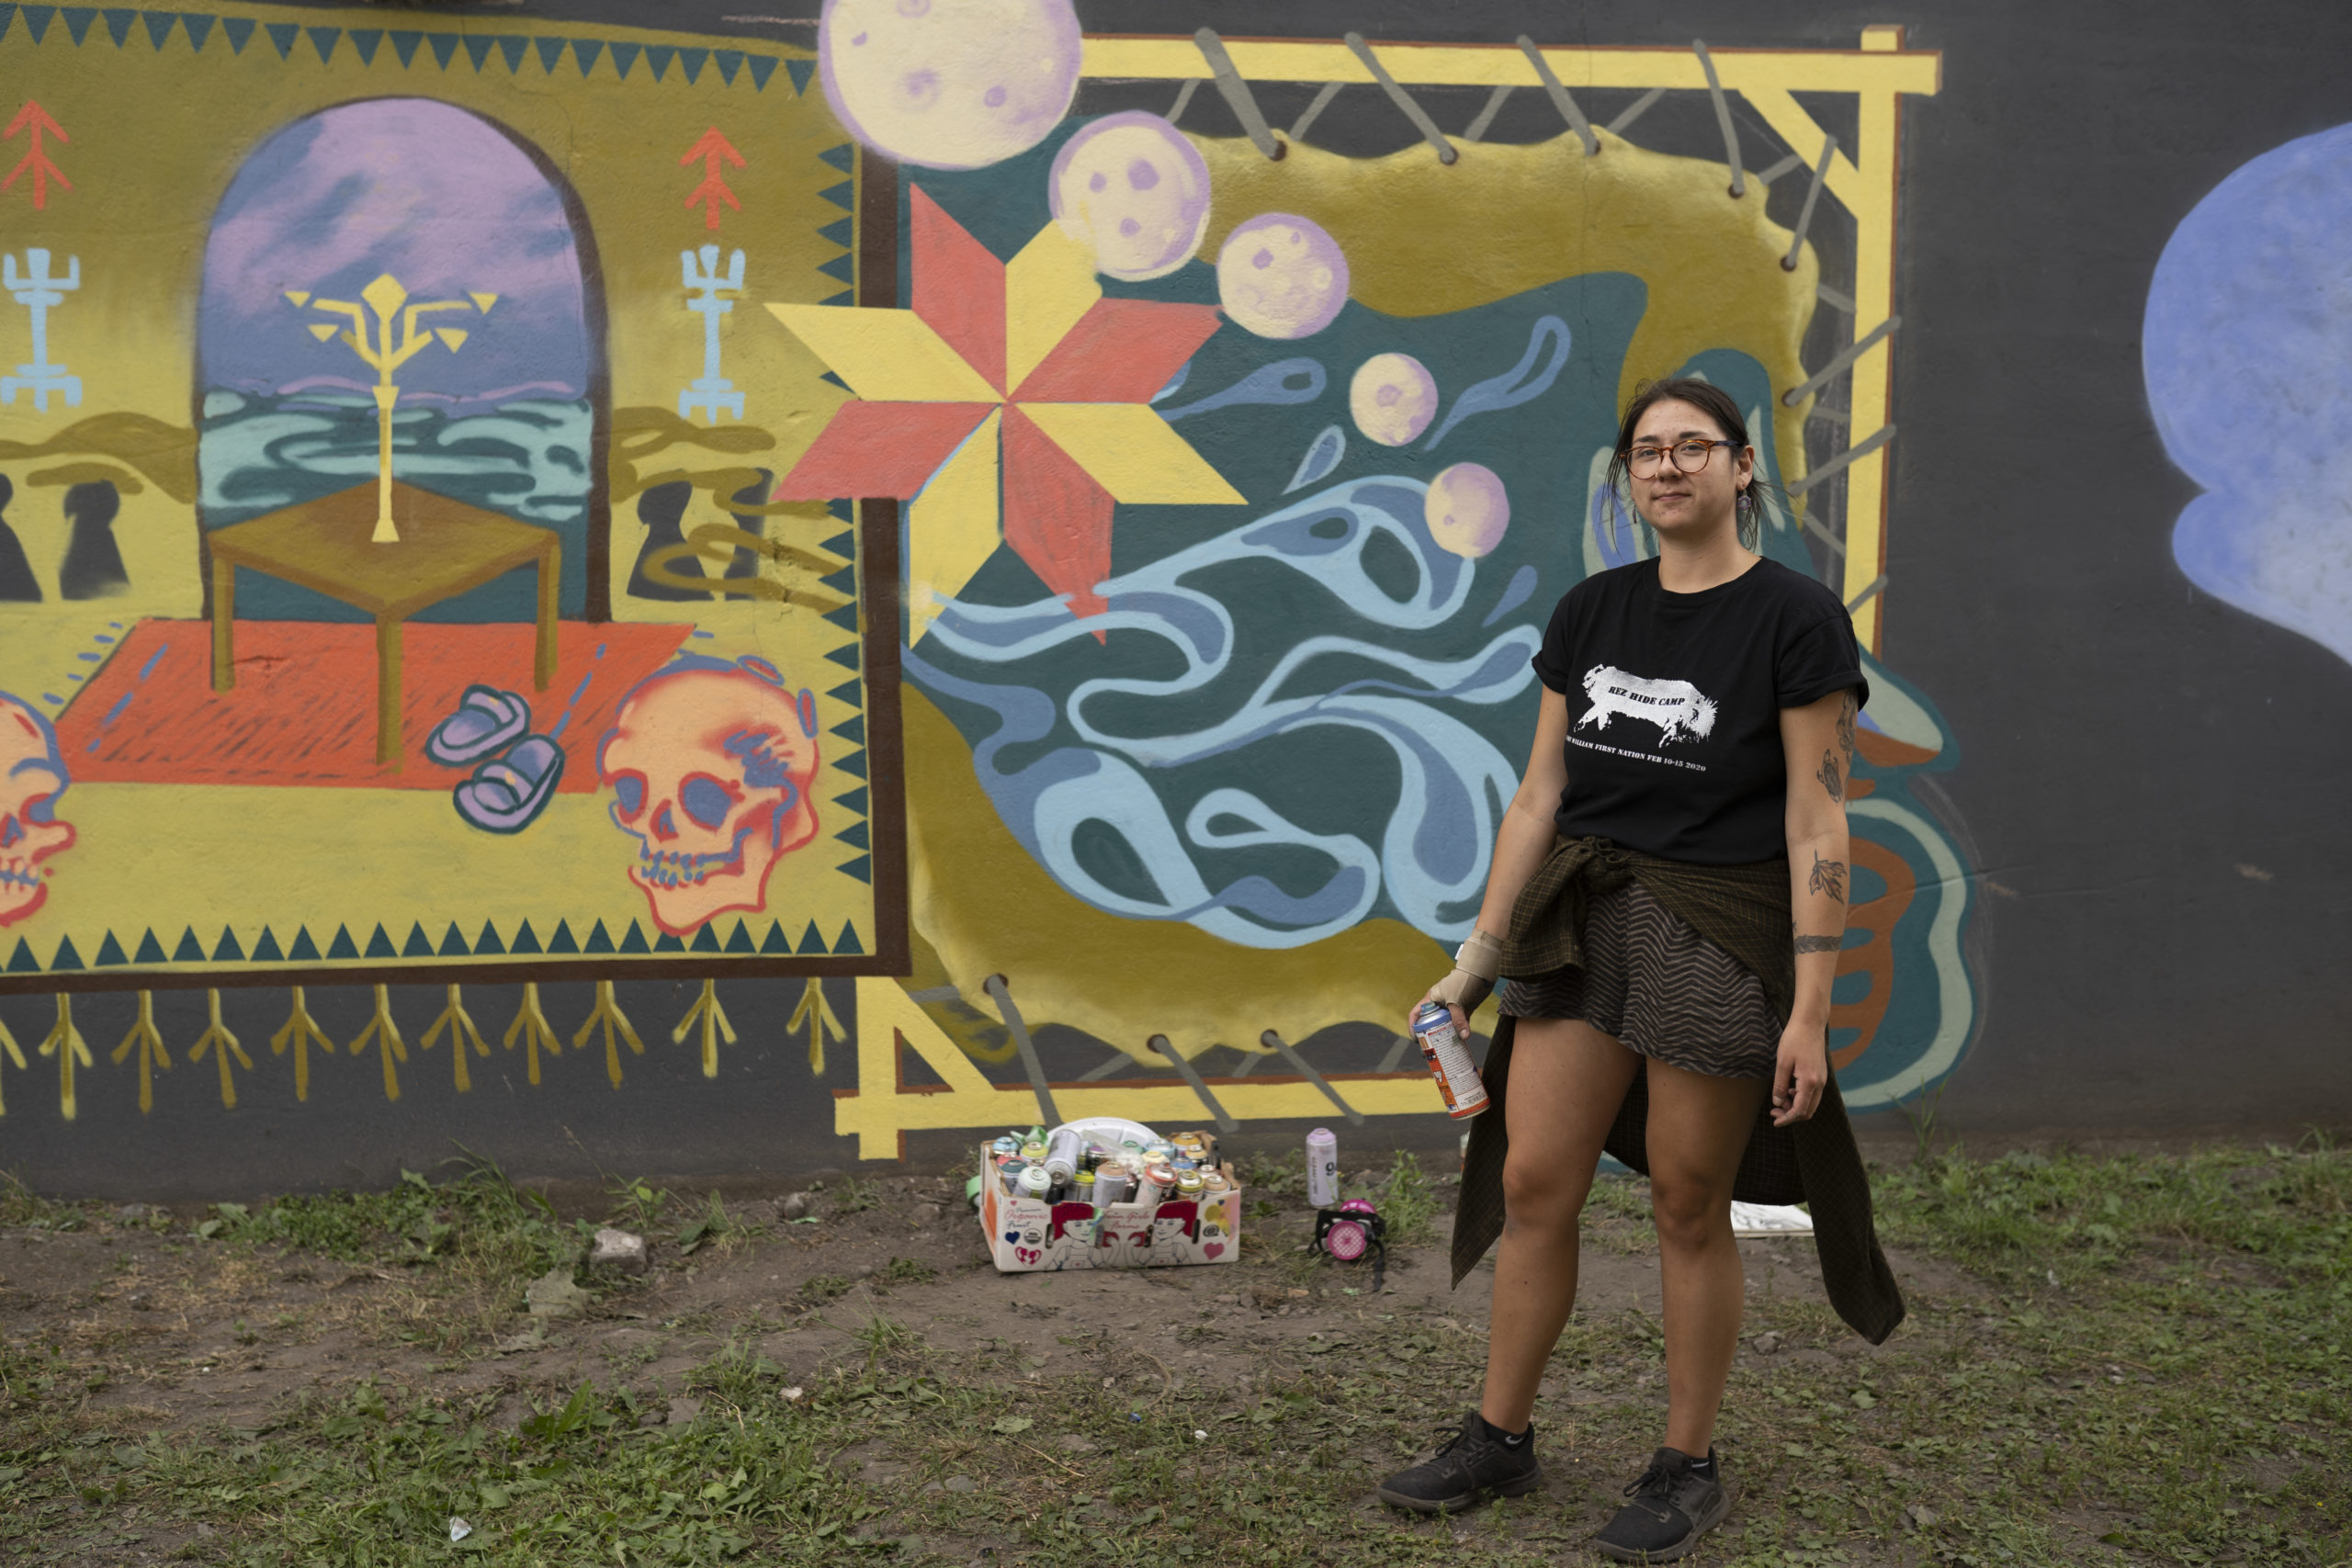 Artist Shelby Gagnon posing in front of her first mural that has both Anishinaabe and Finnish designs. It has colours of yellow ochre, blue, purple and red. Shelby is wearing an all black outfit and parts of the grass is showing.